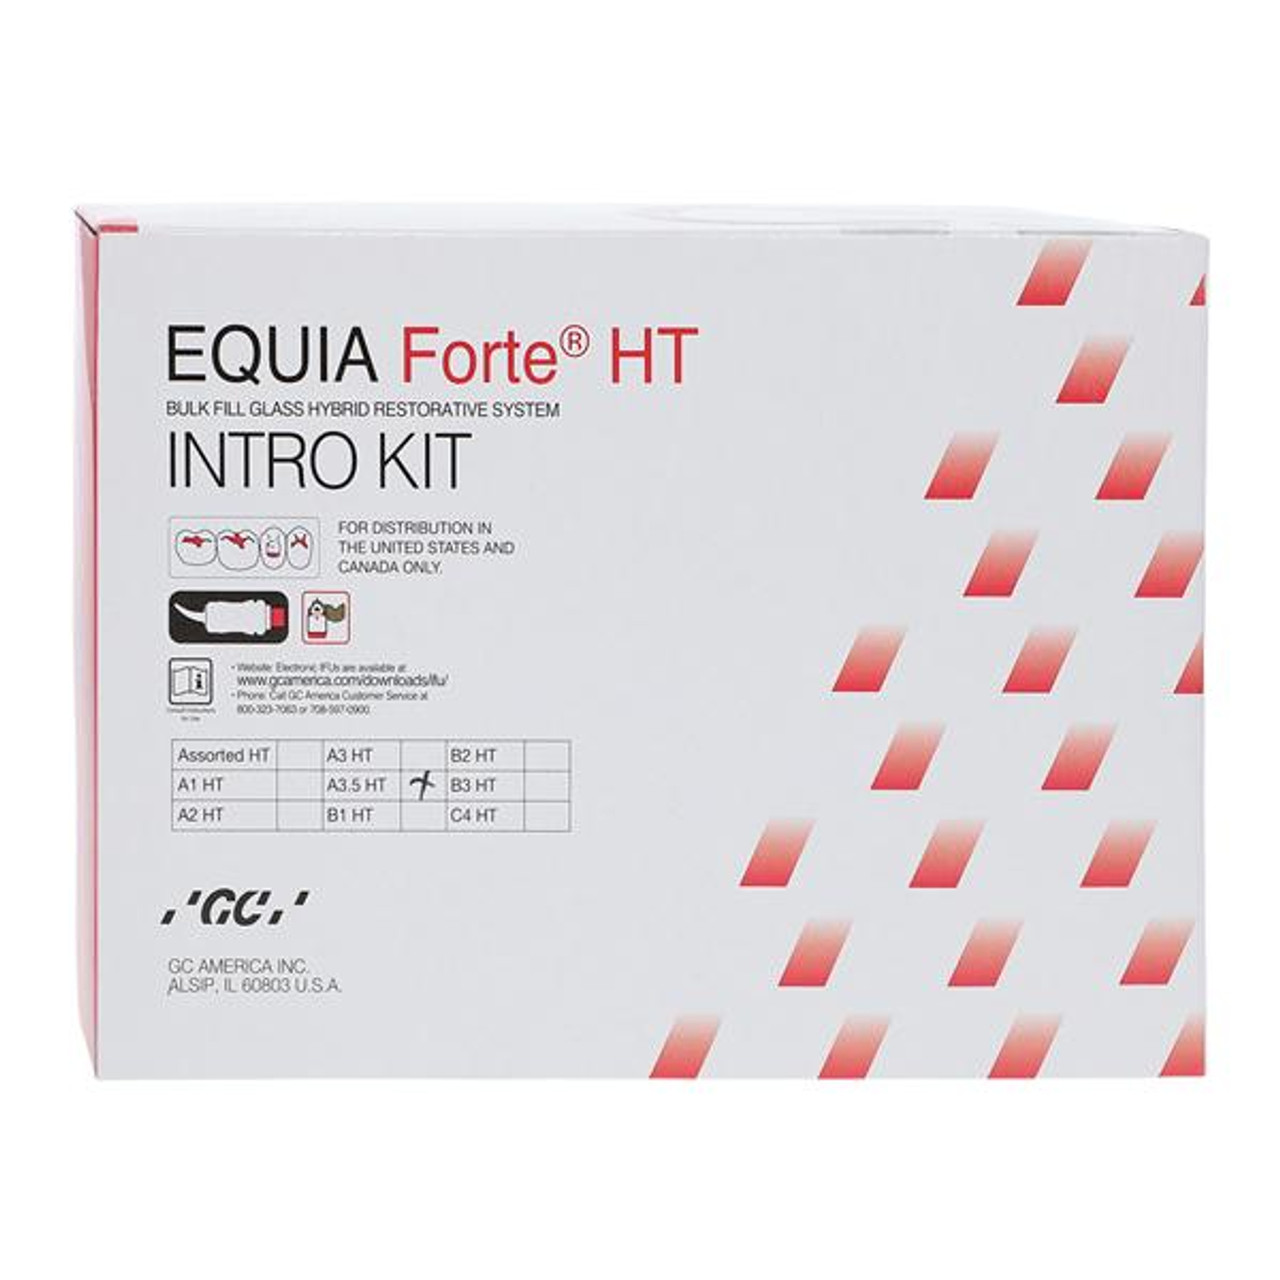 Equia Forte HT Intro Kit A3.5